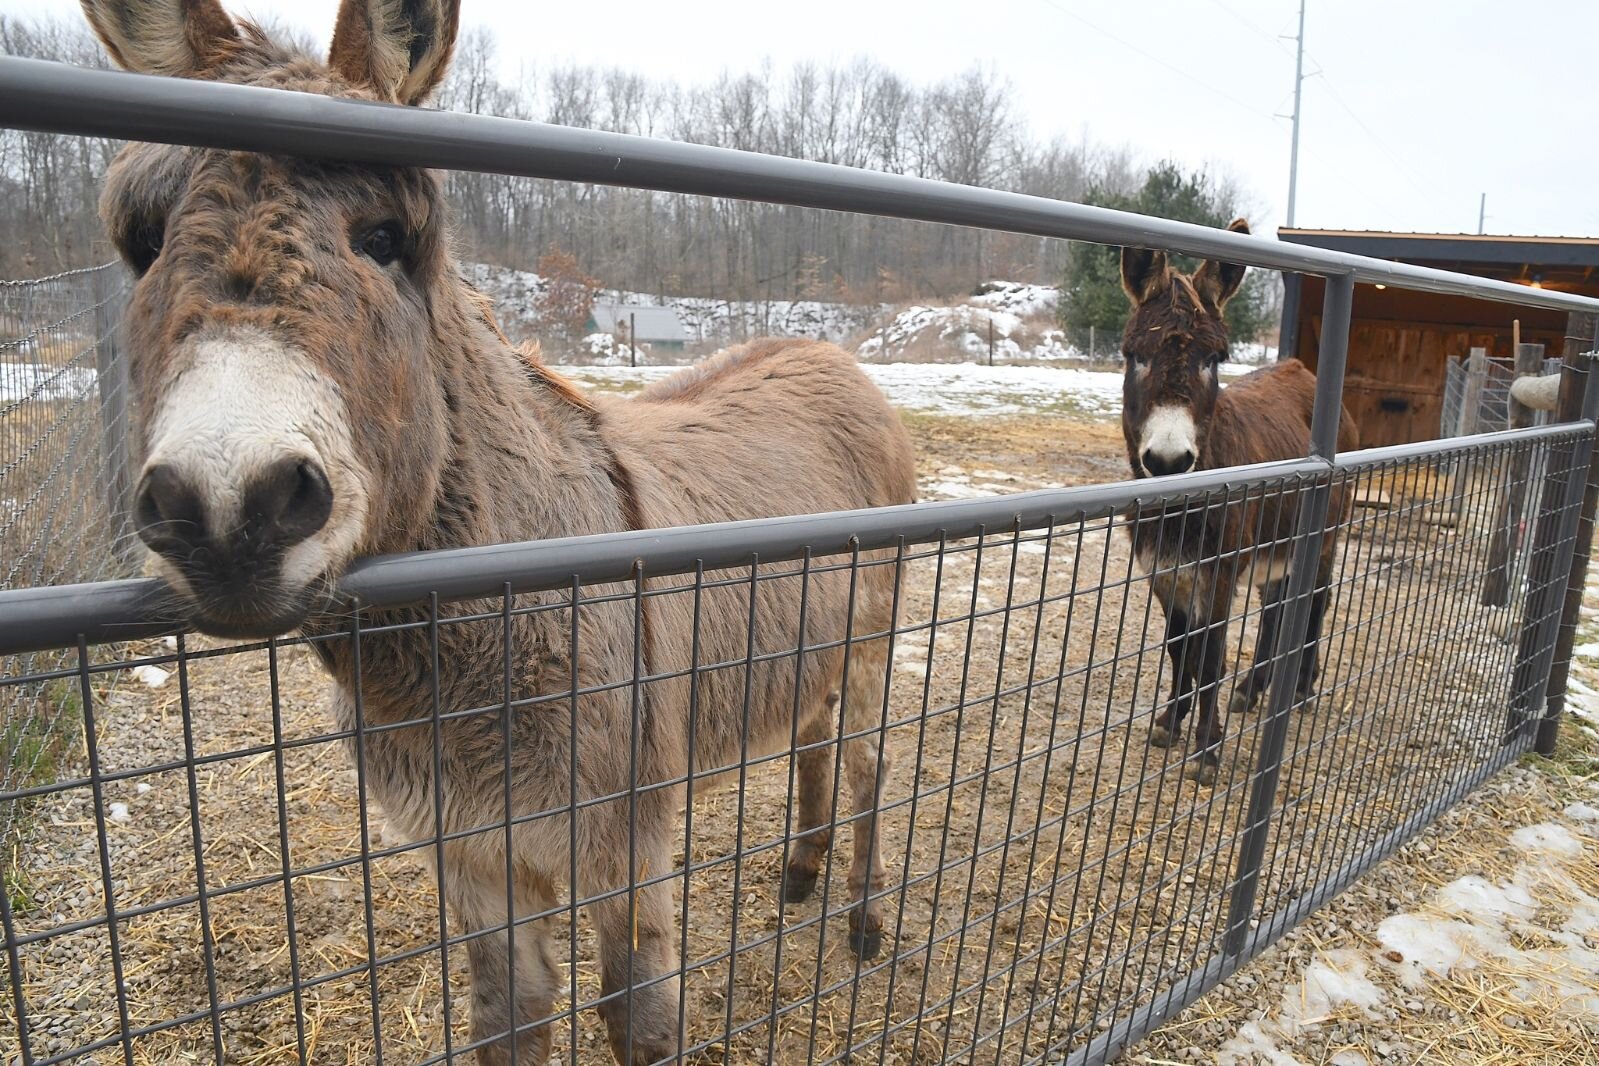 Donkeys help deter coyotes from the sheep at the Zebolsky’s farm.